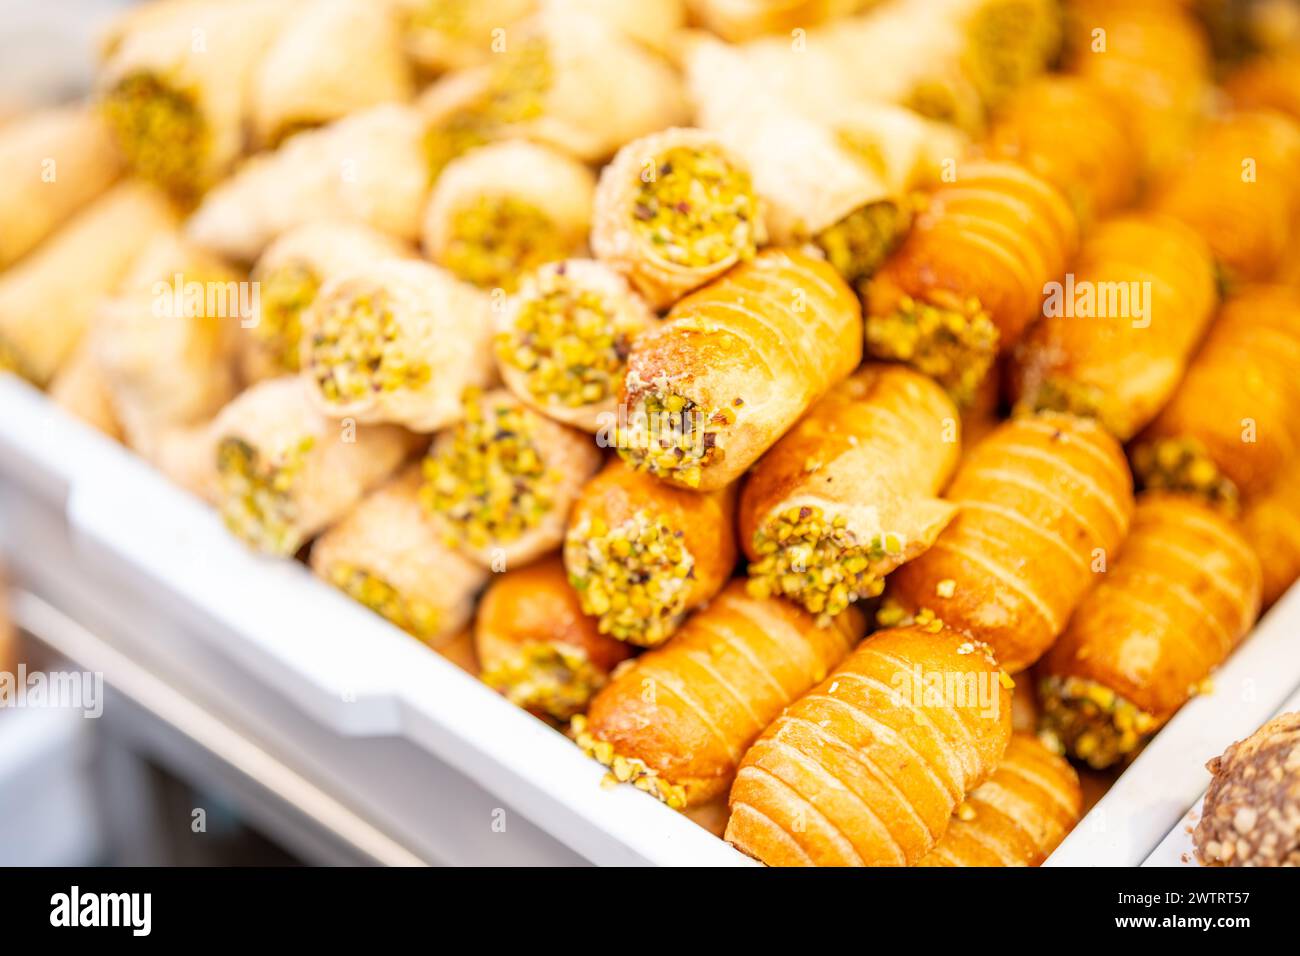 Delicious pastries filled with pistachios and nuts Stock Photo